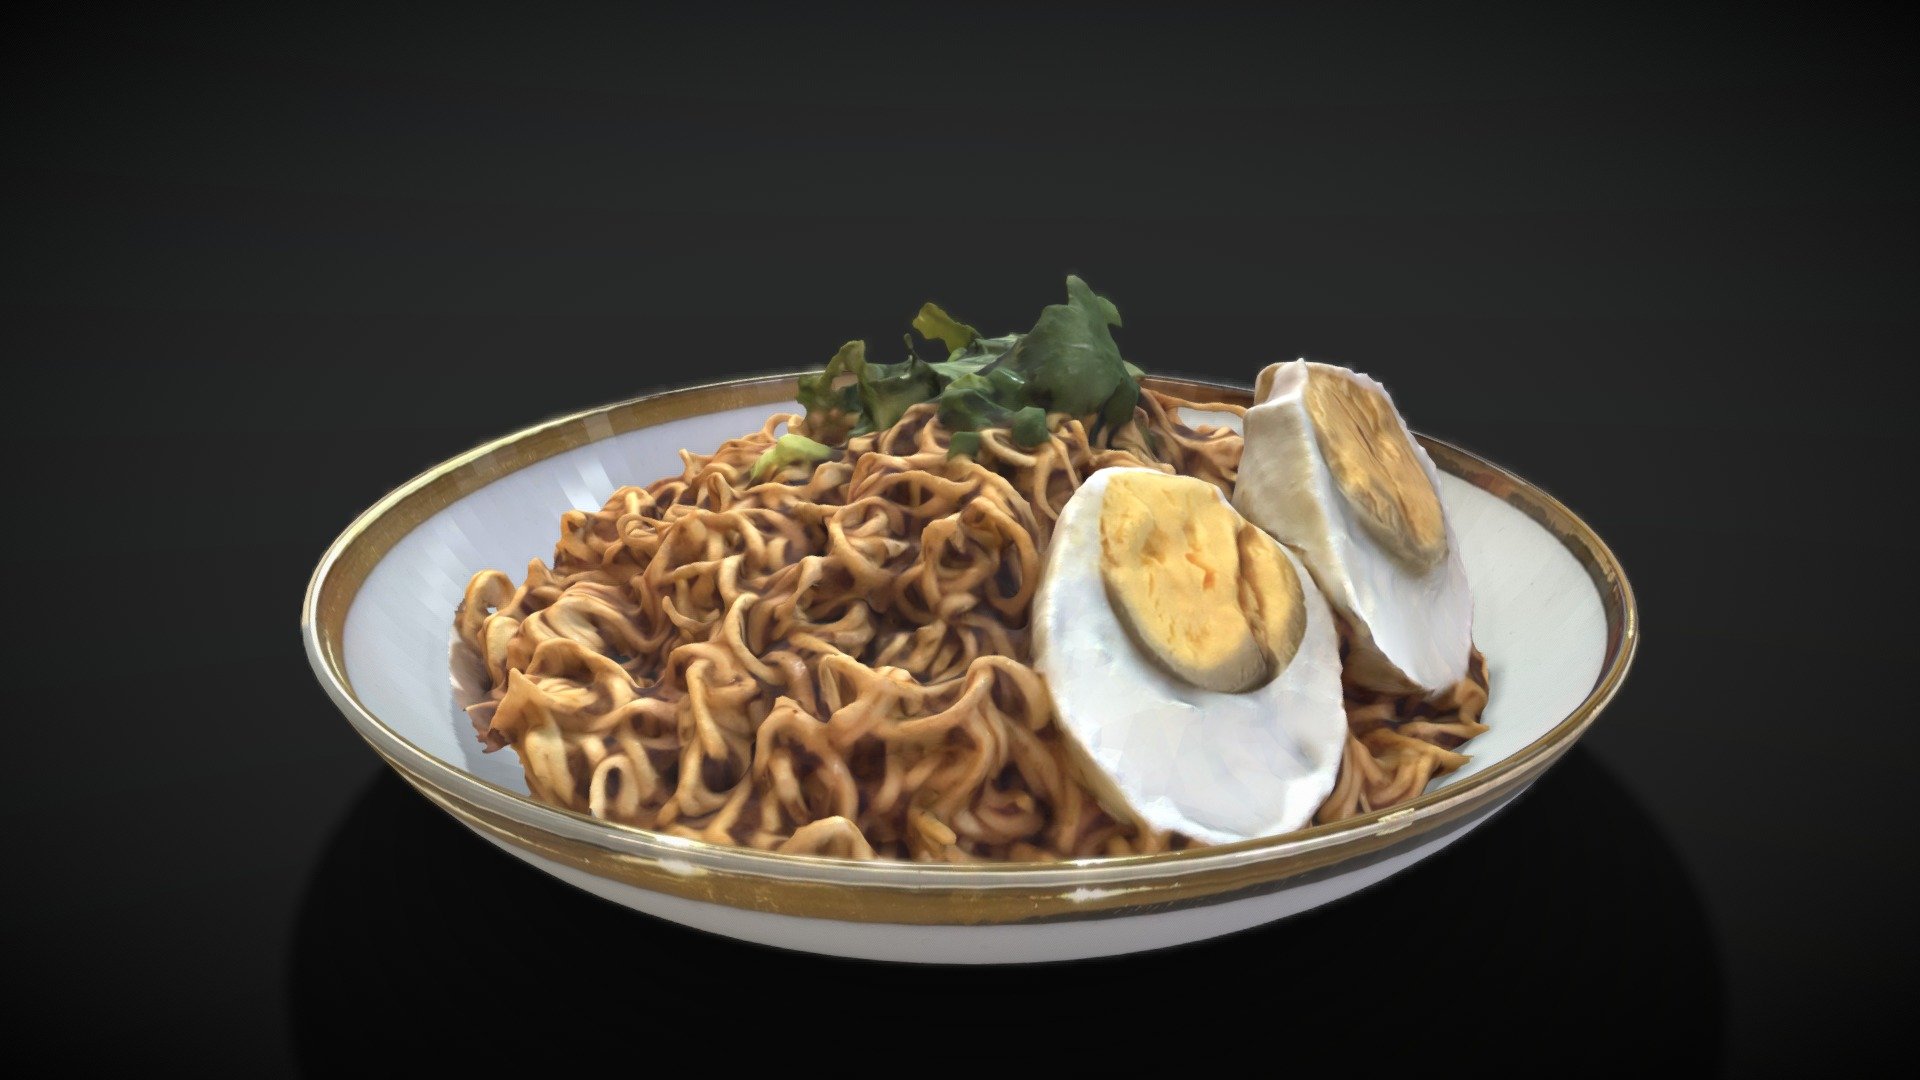 00-KT78- Instant Noodles On Top with Boiled Eggs (Stir-fried Clam Flavor)

Indulge in the savory symphony of flavors with our tantalizing Instant Noodles Stir-fried Clam Flavor On Top with Boiled Eggs 3D model. Crafted with culinary finesse, each strand of noodles is meticulously infused with the rich essence of clam, complemented by the creamy texture of boiled eggs. Whether you're a connoisseur of street food or simply craving a delicious meal, our model promises to satisfy your culinary cravings and elevate your dining experience.







food life university cuisine affordable college dinner cook breakfast quick fast dish meal easy snack delicious kitchen cooking lunch soup tasty ramen yummy noodles convenient cheap gastronomy spicy instant culinary instantnoodles flavor foodie delight art homecooking nutritious brunch bowl homecooked fastfood streetfood - Instant Noodles with Boiled Eggs - Buy Royalty Free 3D model by KimtueKP 3d model